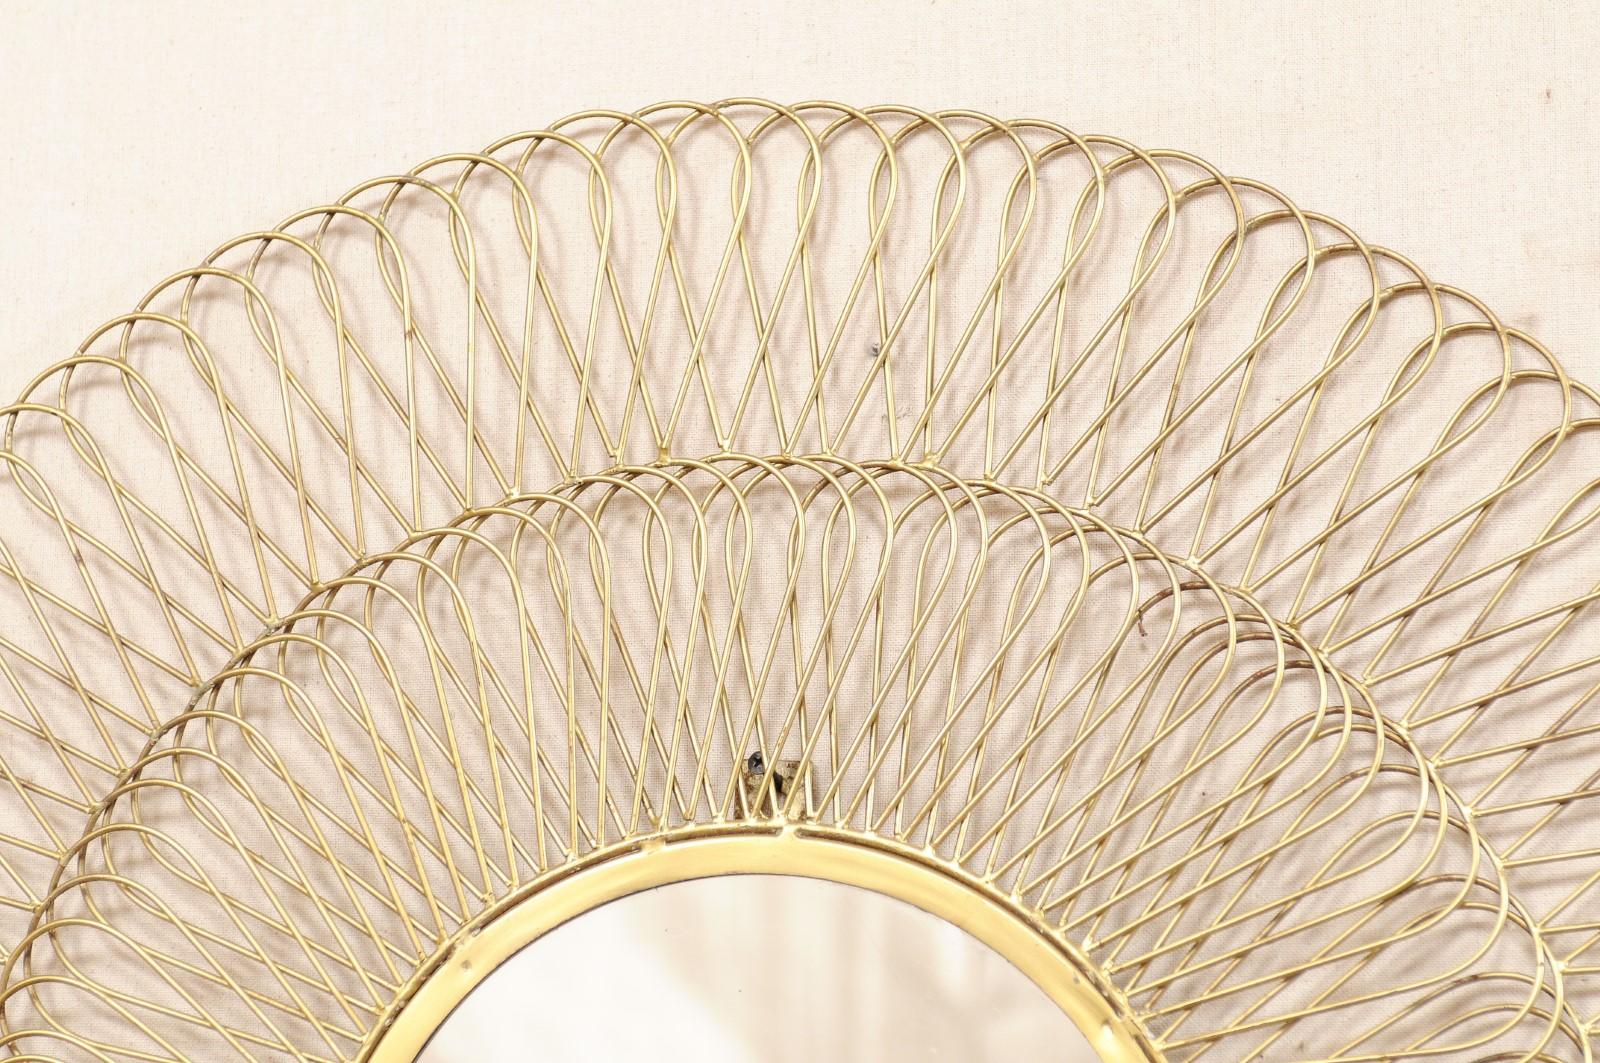 Spanish Round-Shaped Brass Mirror with Open Intertwining Loop Surround For Sale 2